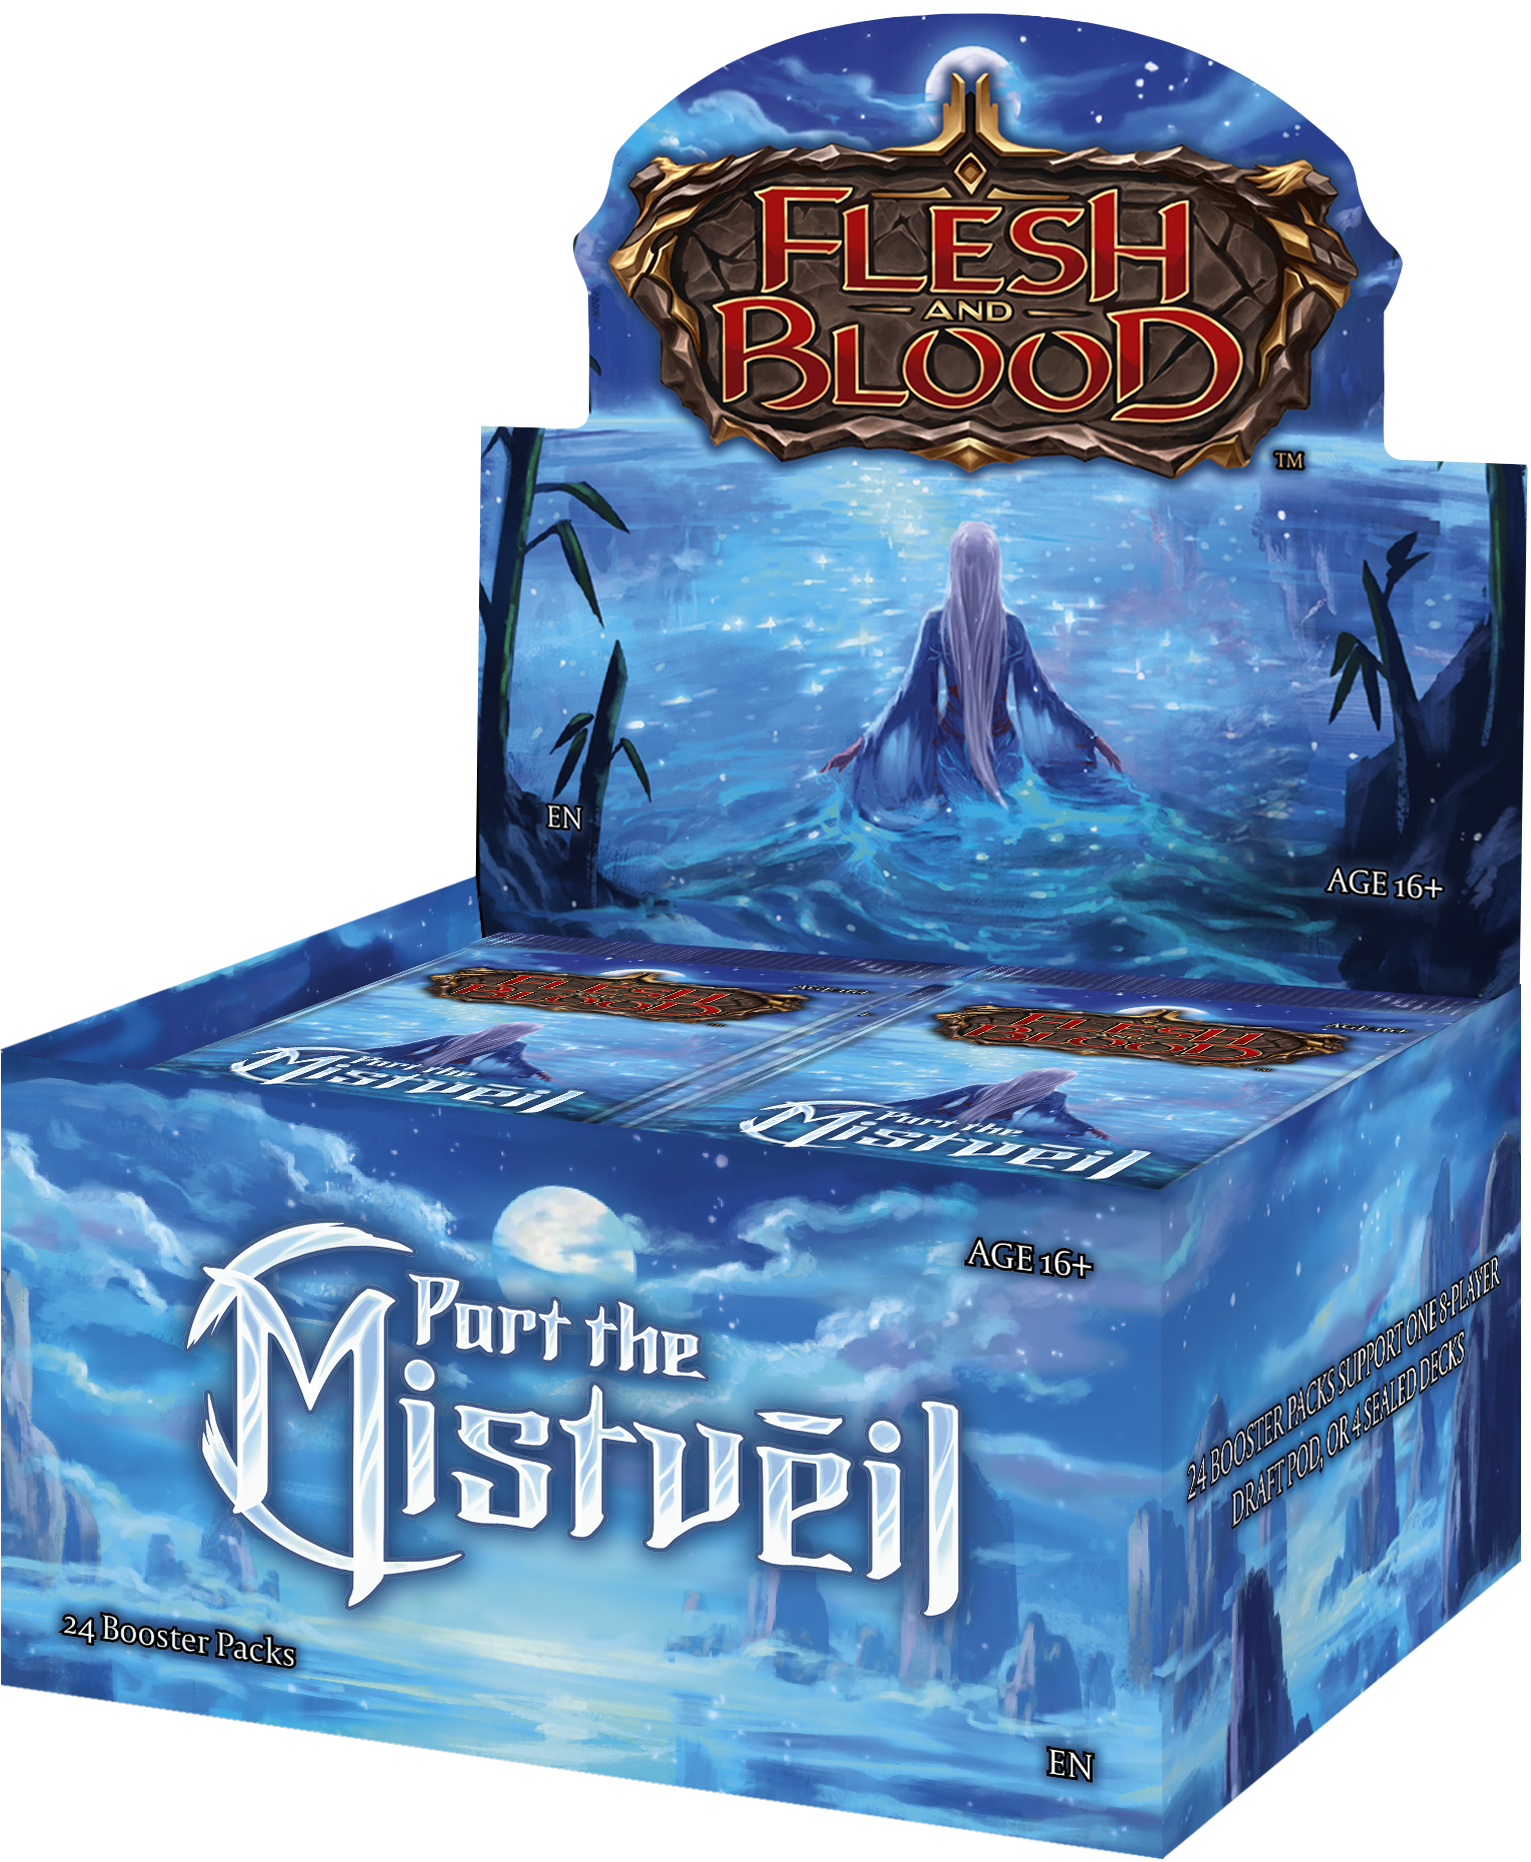 [Preorder] Part the Mistveil Booster Box (English)